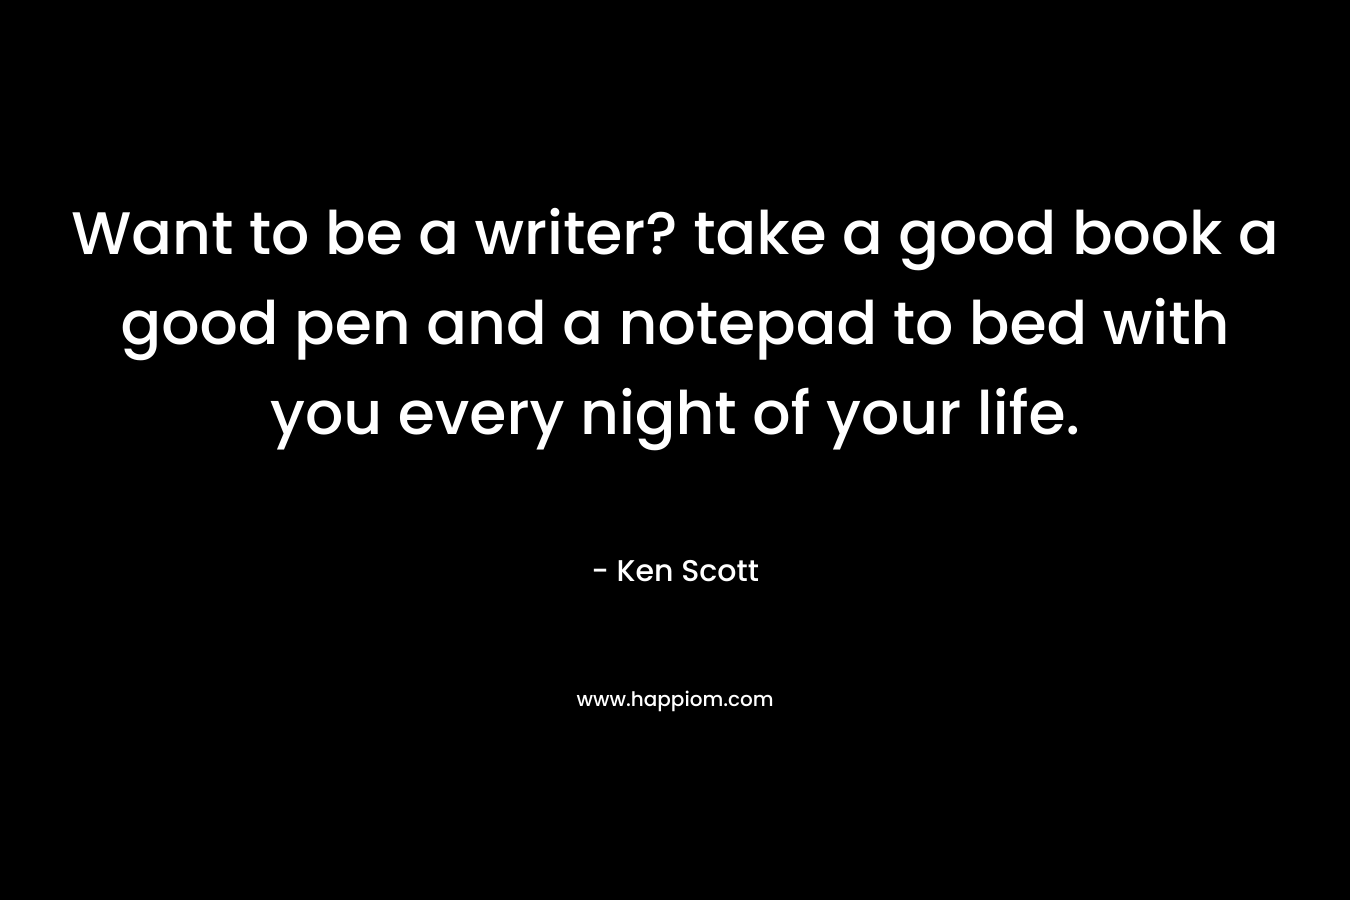 Want to be a writer? take a good book a good pen and a notepad to bed with you every night of your life. – Ken Scott